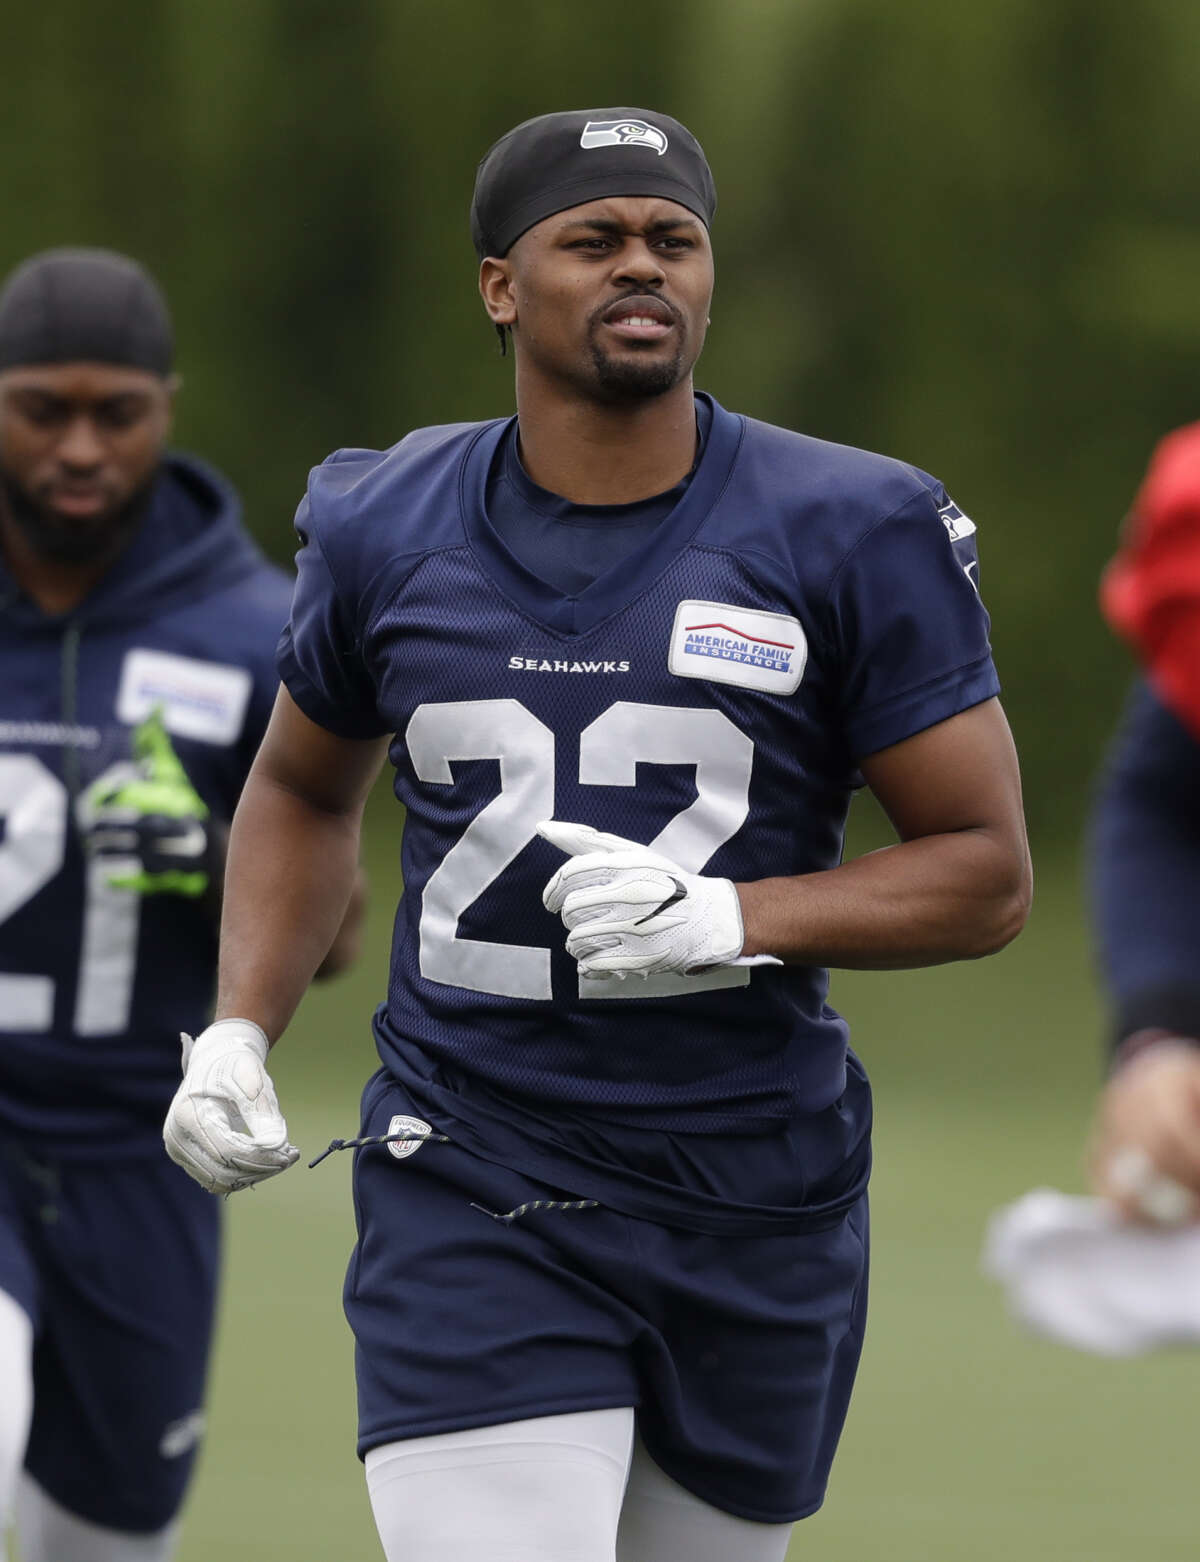 Penny is out for a couple weeks. Carroll revealed that Mike Davis, another one of the team's running backs, has a "sore, great toe" (Although it's unclear how long he'll be sidelined for). All of sudden C.J. Prosise, who's had his own struggle with injuries, could see major snaps when Seattle travels to Los Angeles this weekend to play the Chargers. 